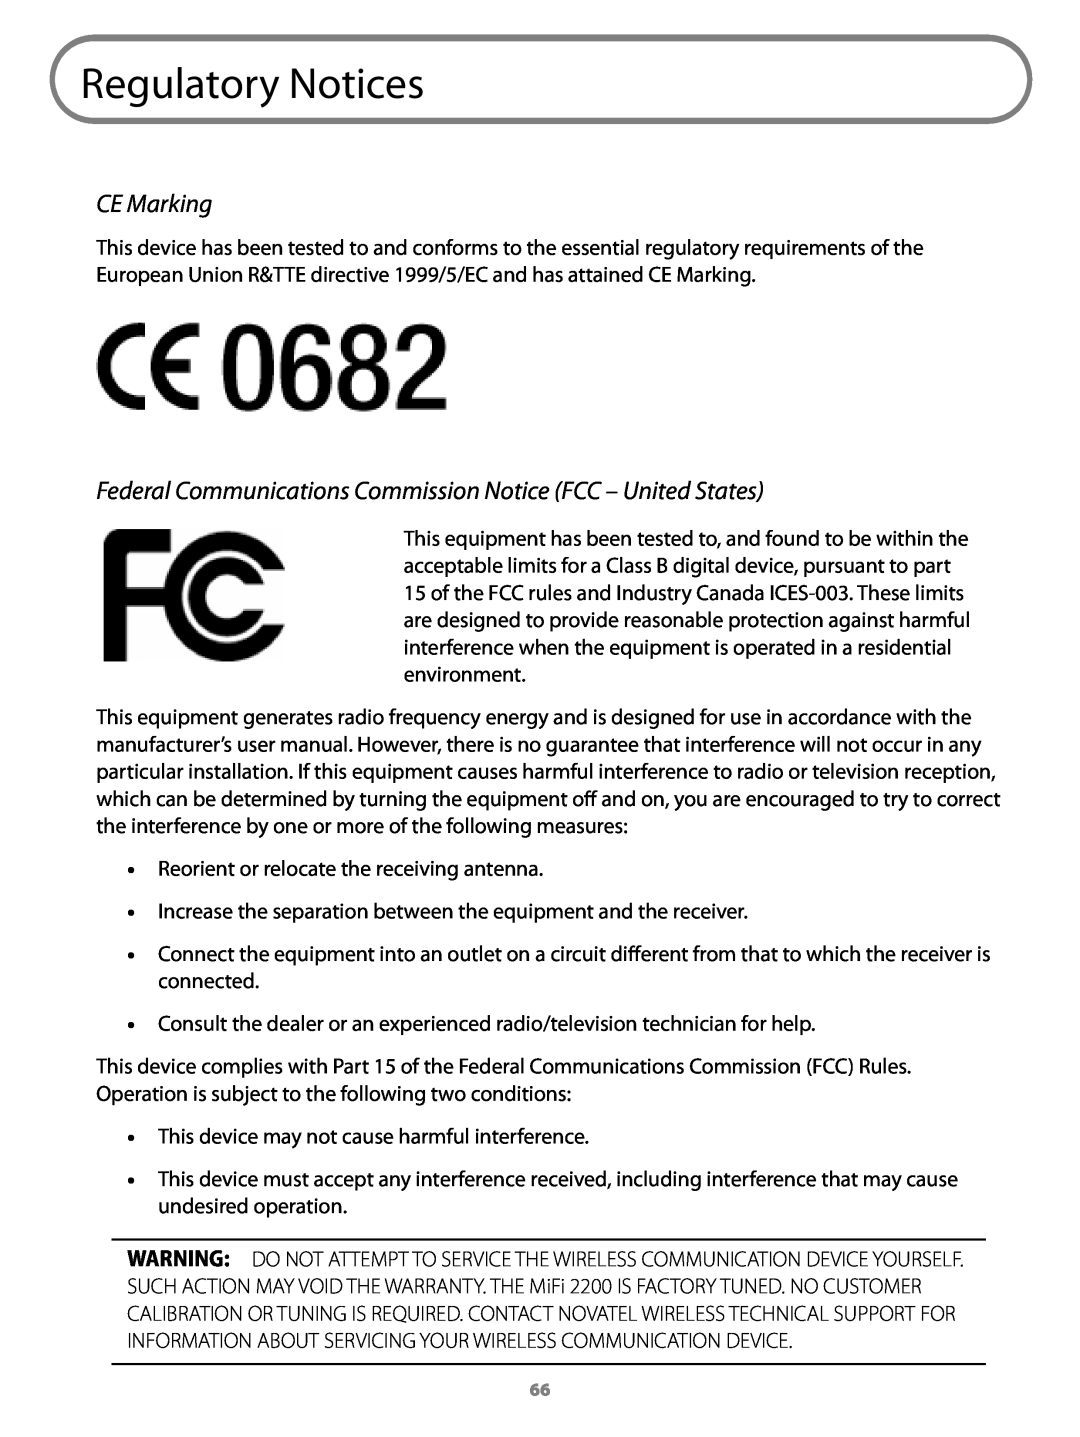 Virgin Mobile 2200 manual Regulatory Notices, CE Marking, Federal Communications Commission Notice FCC - United States 